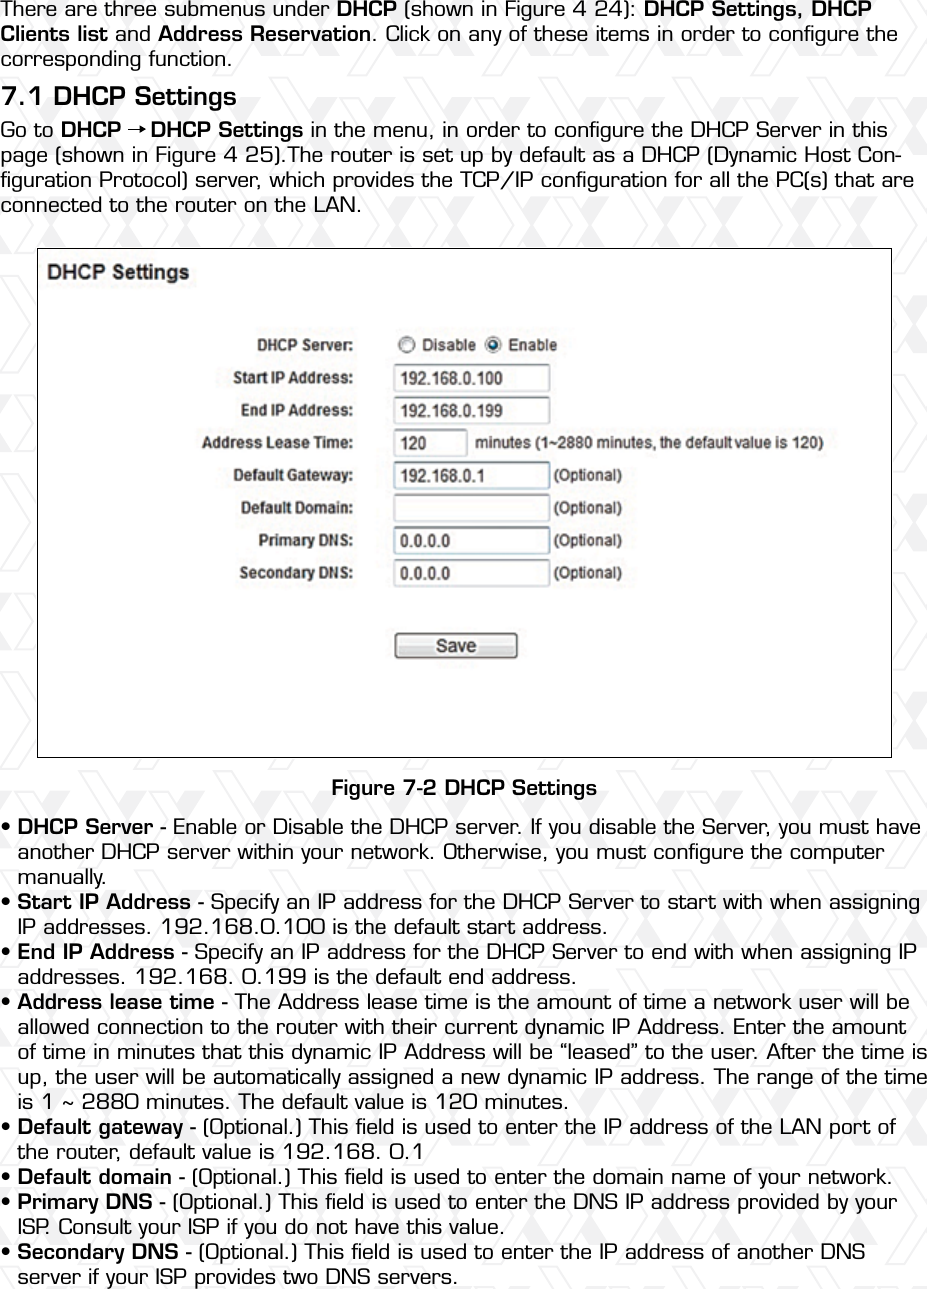 Nexxt Solutions – Wireless-N 3G router48There are three submenus under DHCP (shown in Figure 4 24): DHCP Settings, DHCP Clients list and Address Reservation. Click on any of these items in order to conﬁgure the corresponding function.Go to DHCP    DHCP Settings in the menu, in order to conﬁgure the DHCP Server in this page (shown in Figure 4 25).The router is set up by default as a DHCP (Dynamic Host Con-ﬁguration Protocol) server, which provides the TCP/IP conﬁguration for all the PC(s) that are connected to the router on the LAN. 7.1 DHCP SettingsFigure 7-2 DHCP SettingsDHCP Server - Enable or Disable the DHCP server. If you disable the Server, you must have another DHCP server within your network. Otherwise, you must conﬁgure the computer manually.Start IP Address - Specify an IP address for the DHCP Server to start with when assigning IP addresses. 192.168.0.100 is the default start address.End IP Address - Specify an IP address for the DHCP Server to end with when assigning IP addresses. 192.168. 0.199 is the default end address.Address lease time - The Address lease time is the amount of time a network user will be allowed connection to the router with their current dynamic IP Address. Enter the amount of time in minutes that this dynamic IP Address will be “leased” to the user. After the time is up, the user will be automatically assigned a new dynamic IP address. The range of the time is 1 ~ 2880 minutes. The default value is 120 minutes.Default gateway - (Optional.) This ﬁeld is used to enter the IP address of the LAN port of the router, default value is 192.168. 0.1Default domain - (Optional.) This ﬁeld is used to enter the domain name of your network.Primary DNS - (Optional.) This ﬁeld is used to enter the DNS IP address provided by your ISP. Consult your ISP if you do not have this value.Secondary DNS - (Optional.) This ﬁeld is used to enter the IP address of another DNS server if your ISP provides two DNS servers.••••••••